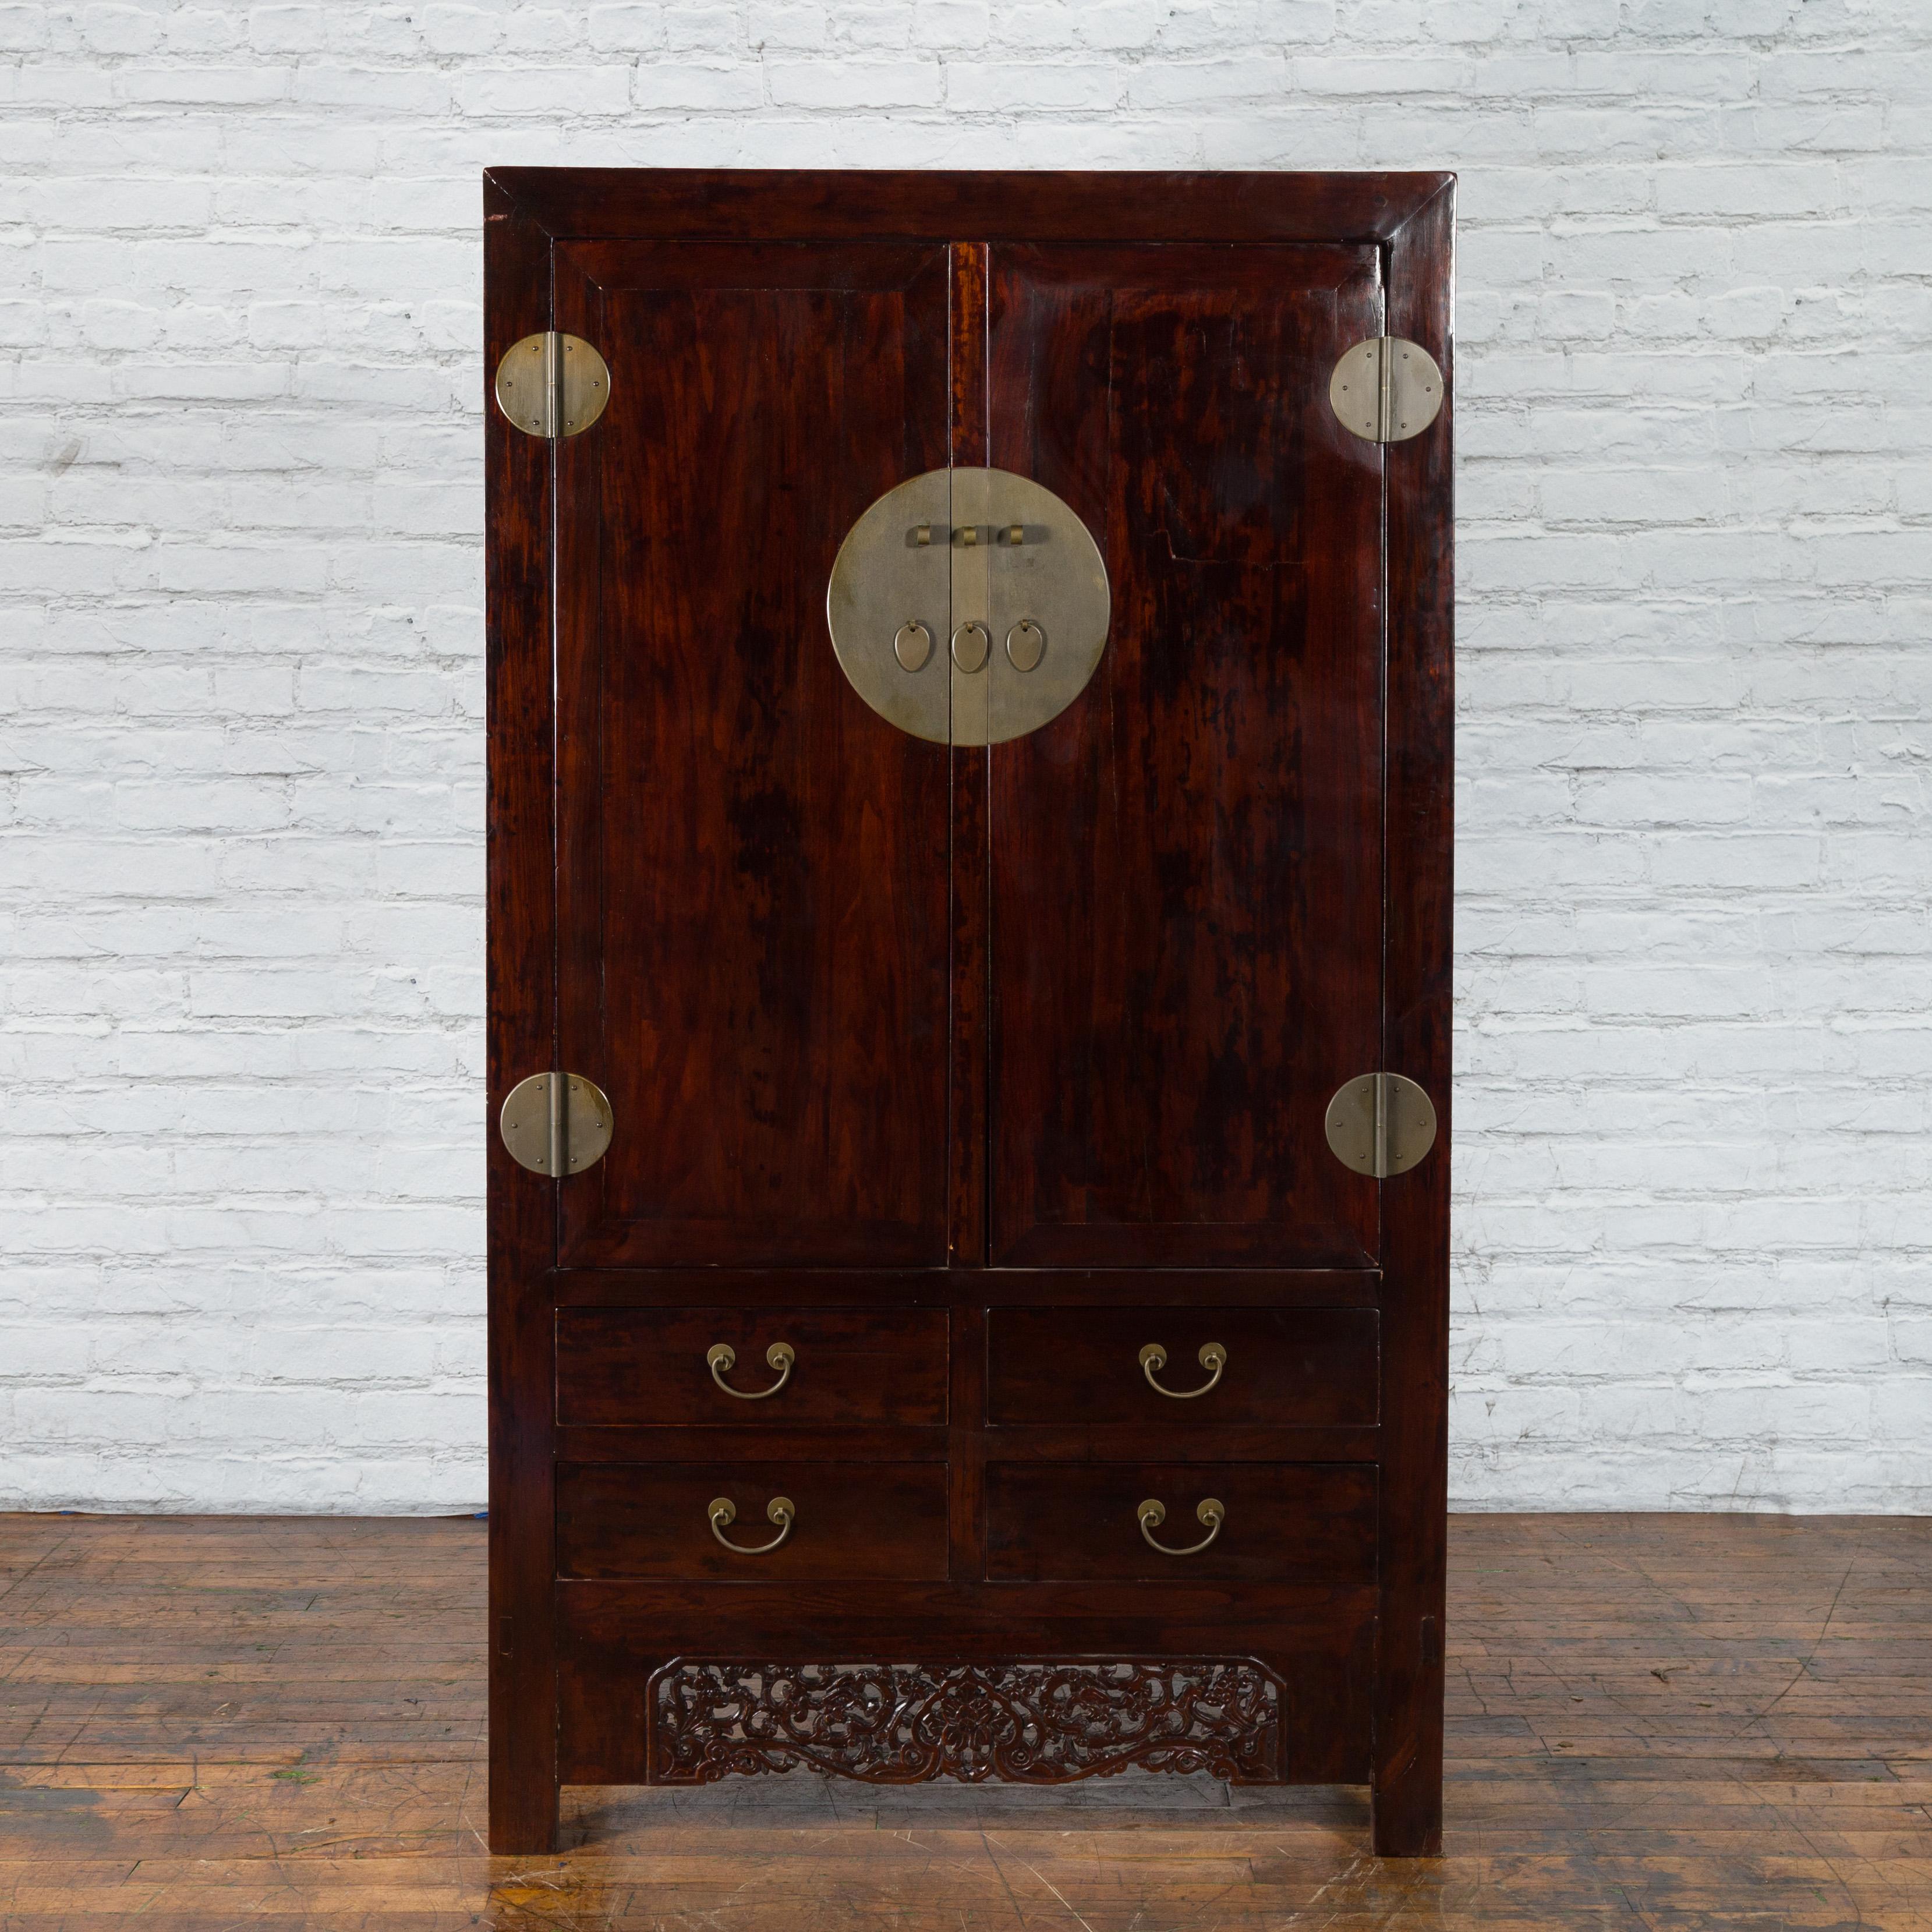 A Chinese Qing Dynasty period elm wood cabinet from the 19th century with double doors, four drawers, large brass medallion hardware and carved apron. We currently have two cabinets available, priced and sold individually. Created in China during